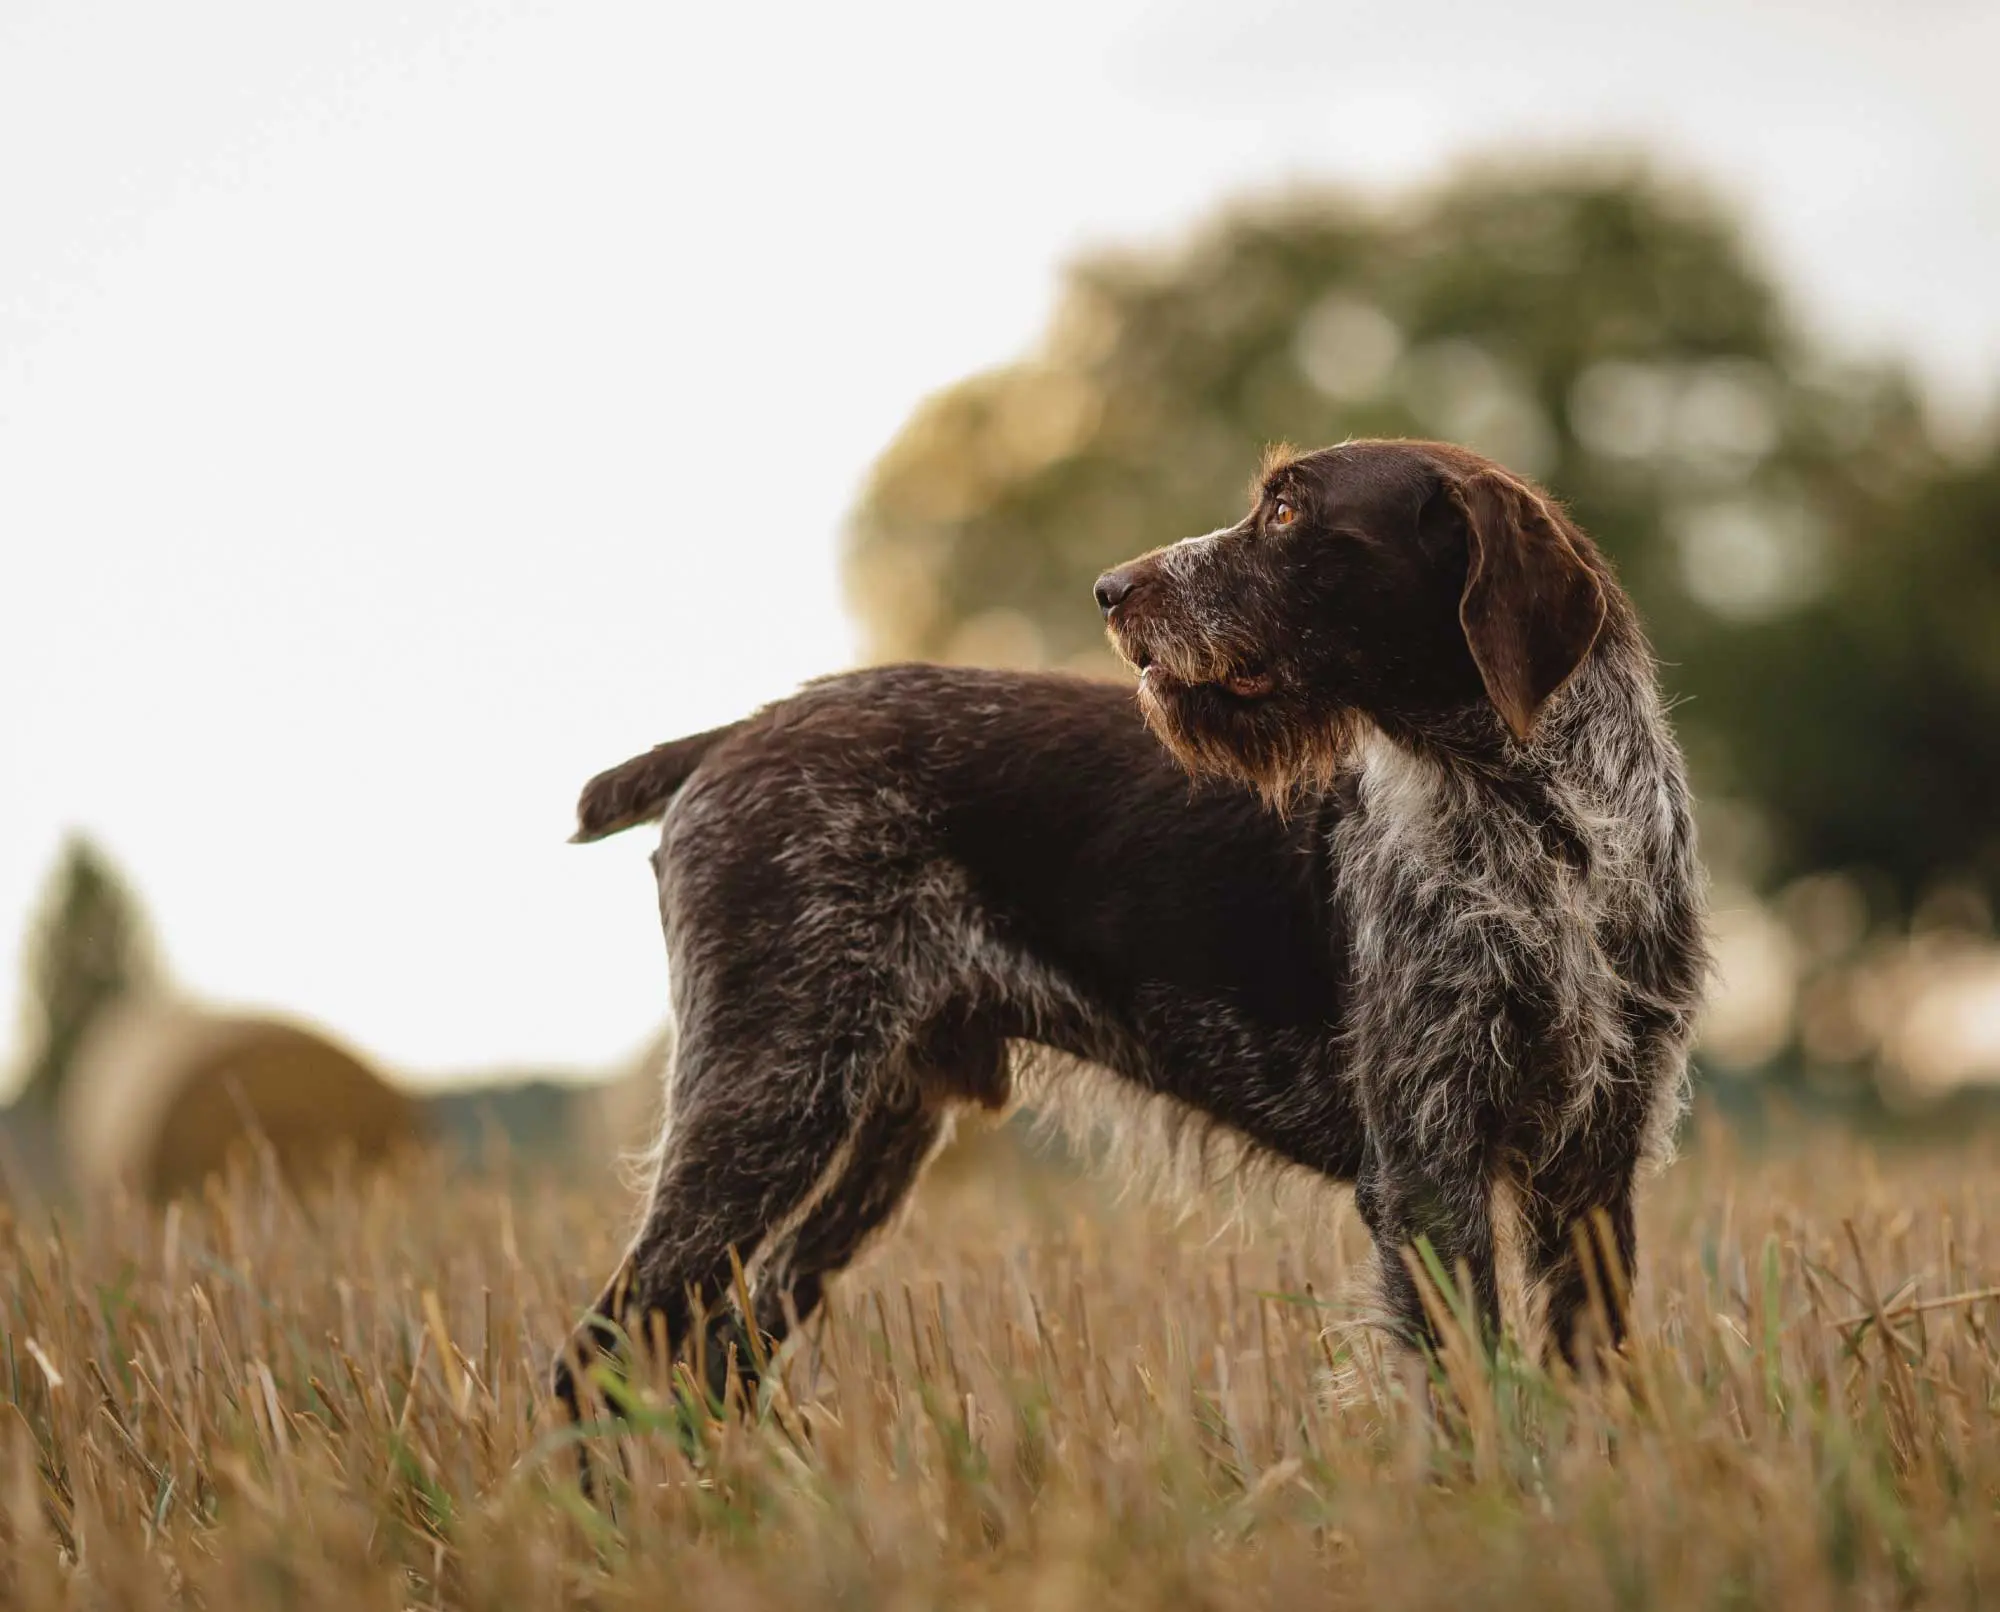 UKC Hunting Ops Podcast - United Kennel Club